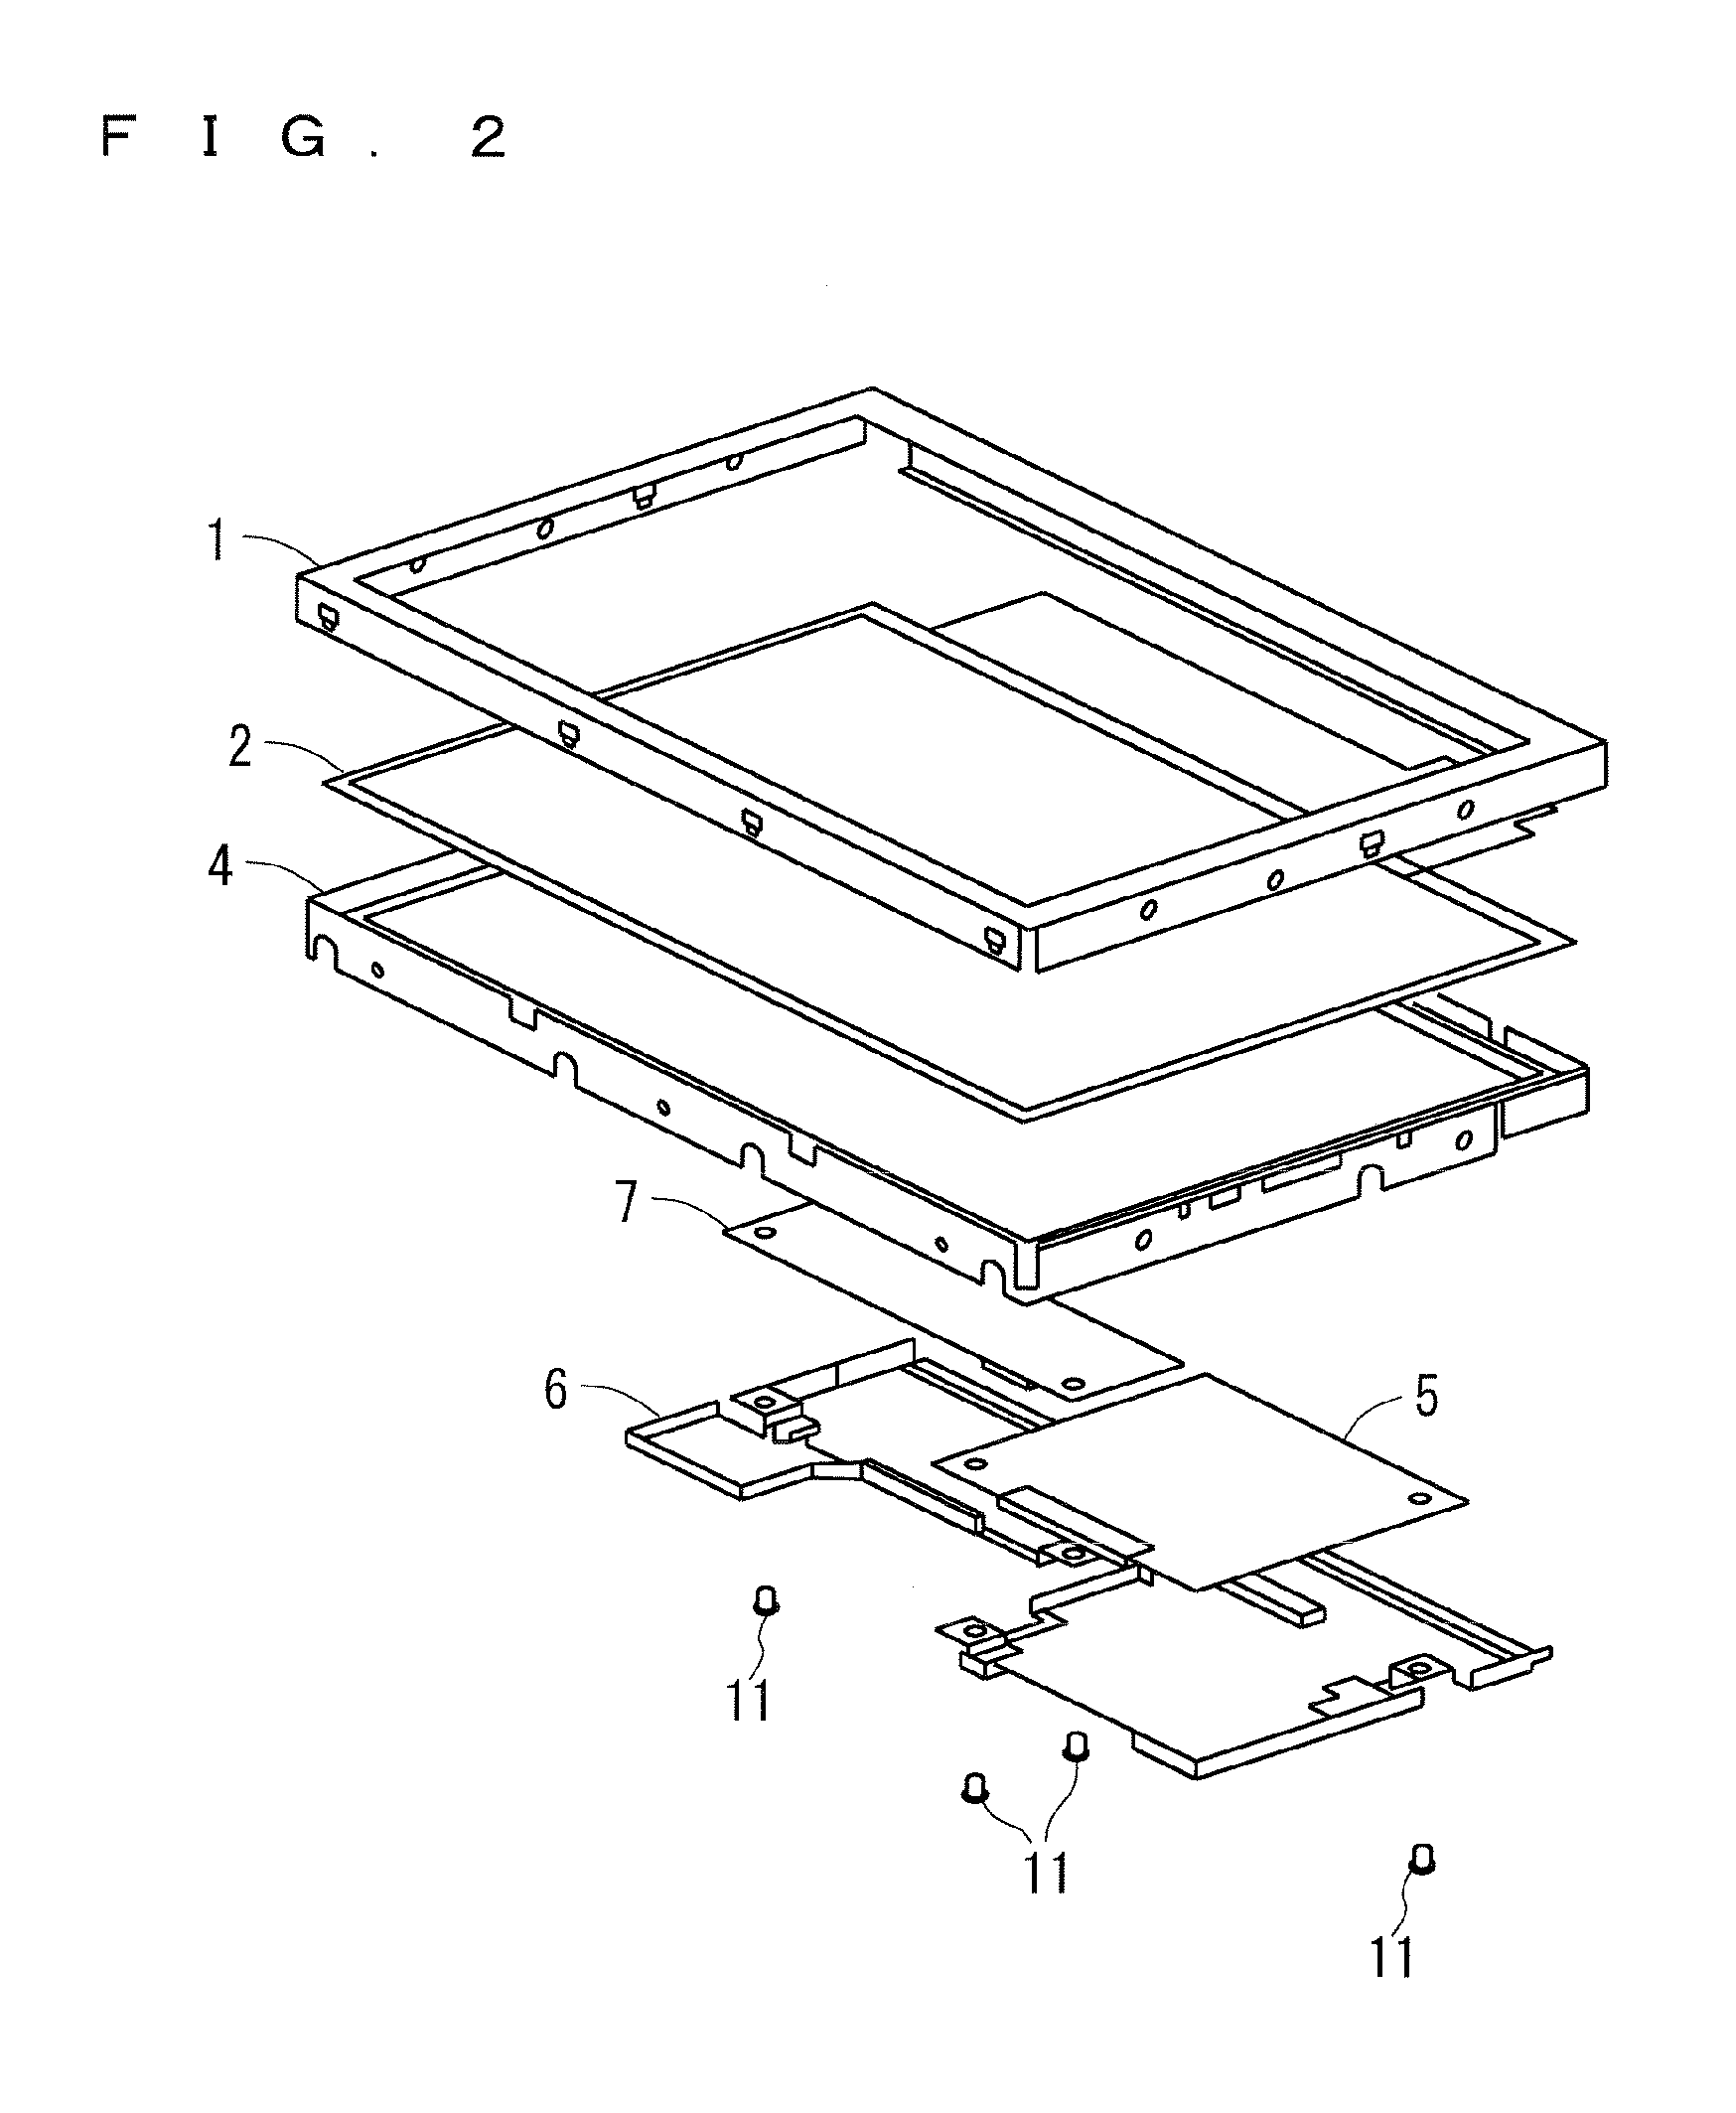 Electronic equipment and flexible printed circuit